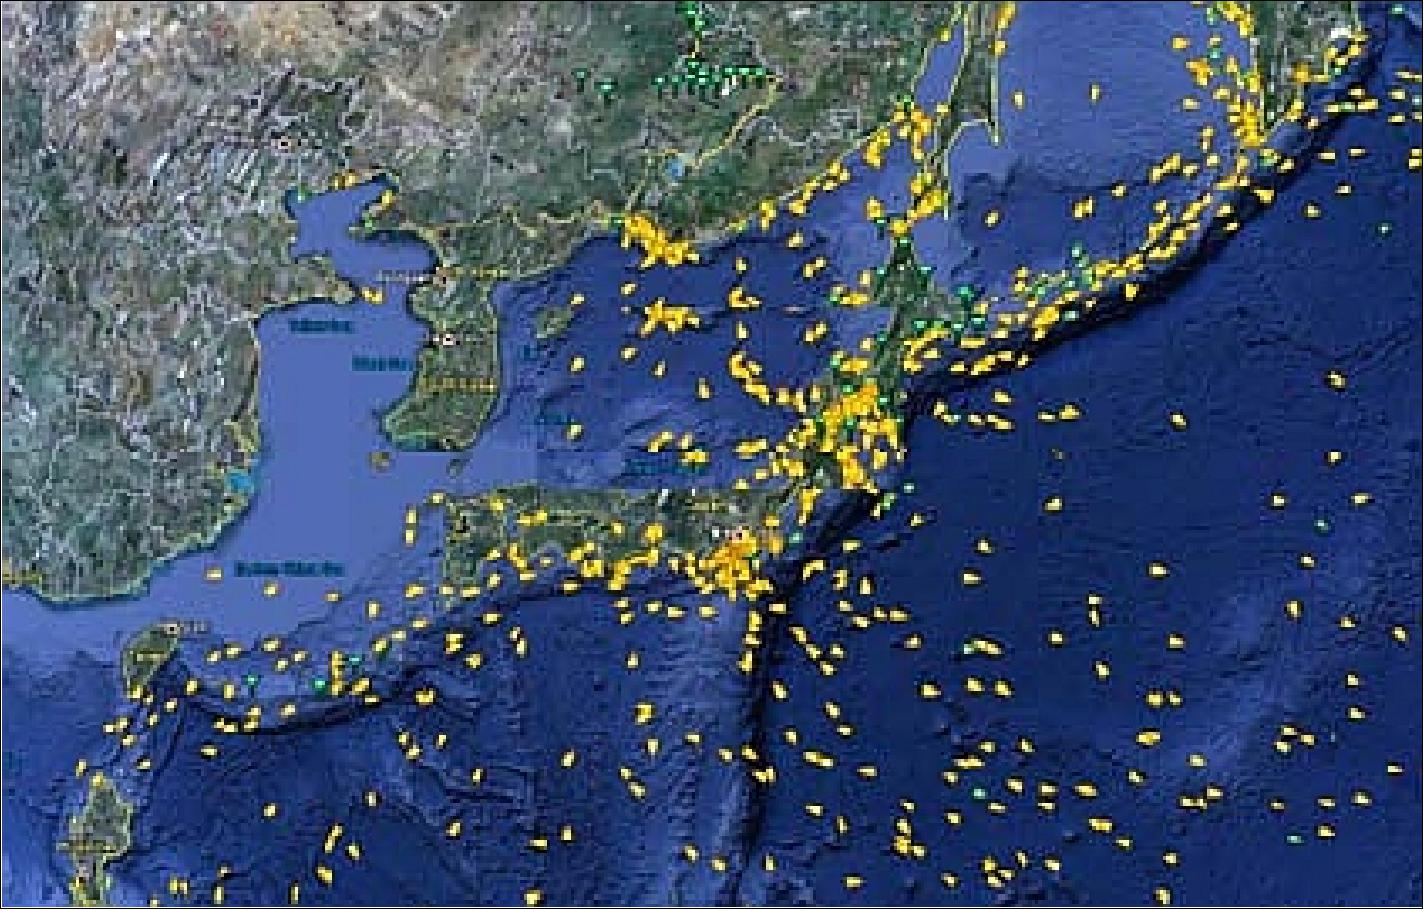 Figure 18: Vessel situation around Japan during the catastrophic tsunami (image credit: FFI)